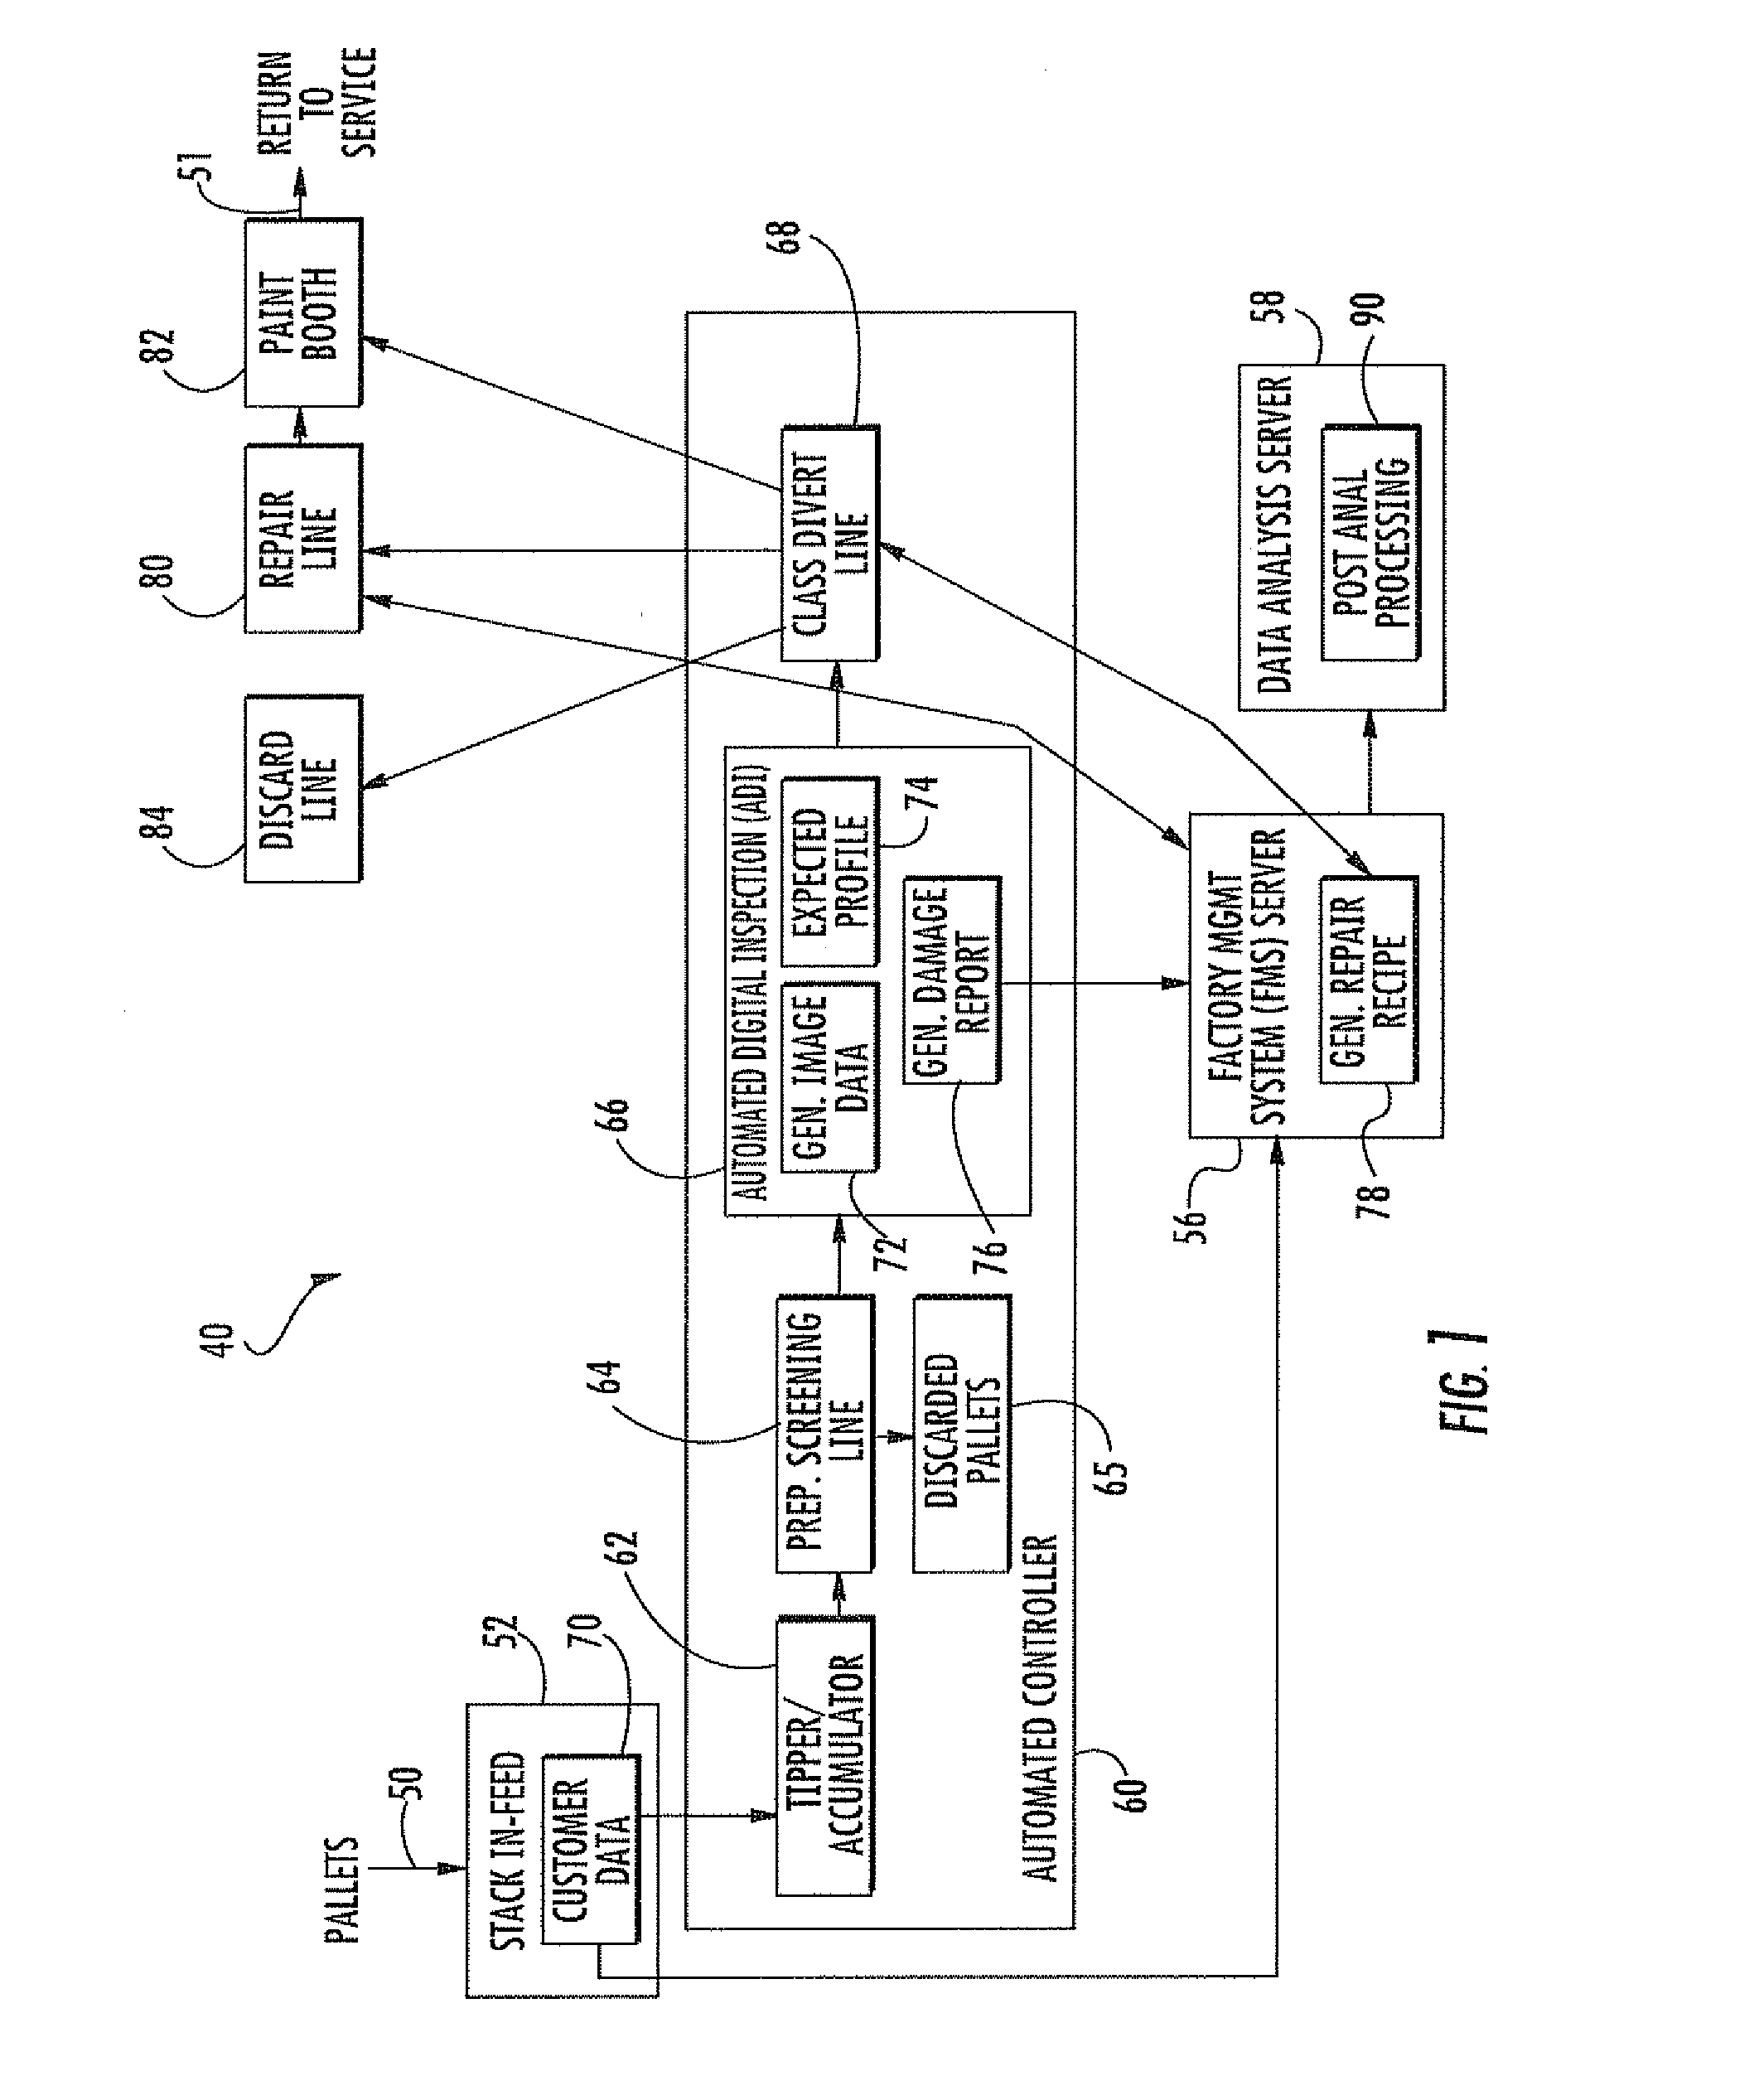 Board removal apparatus for a pallet and associated methods